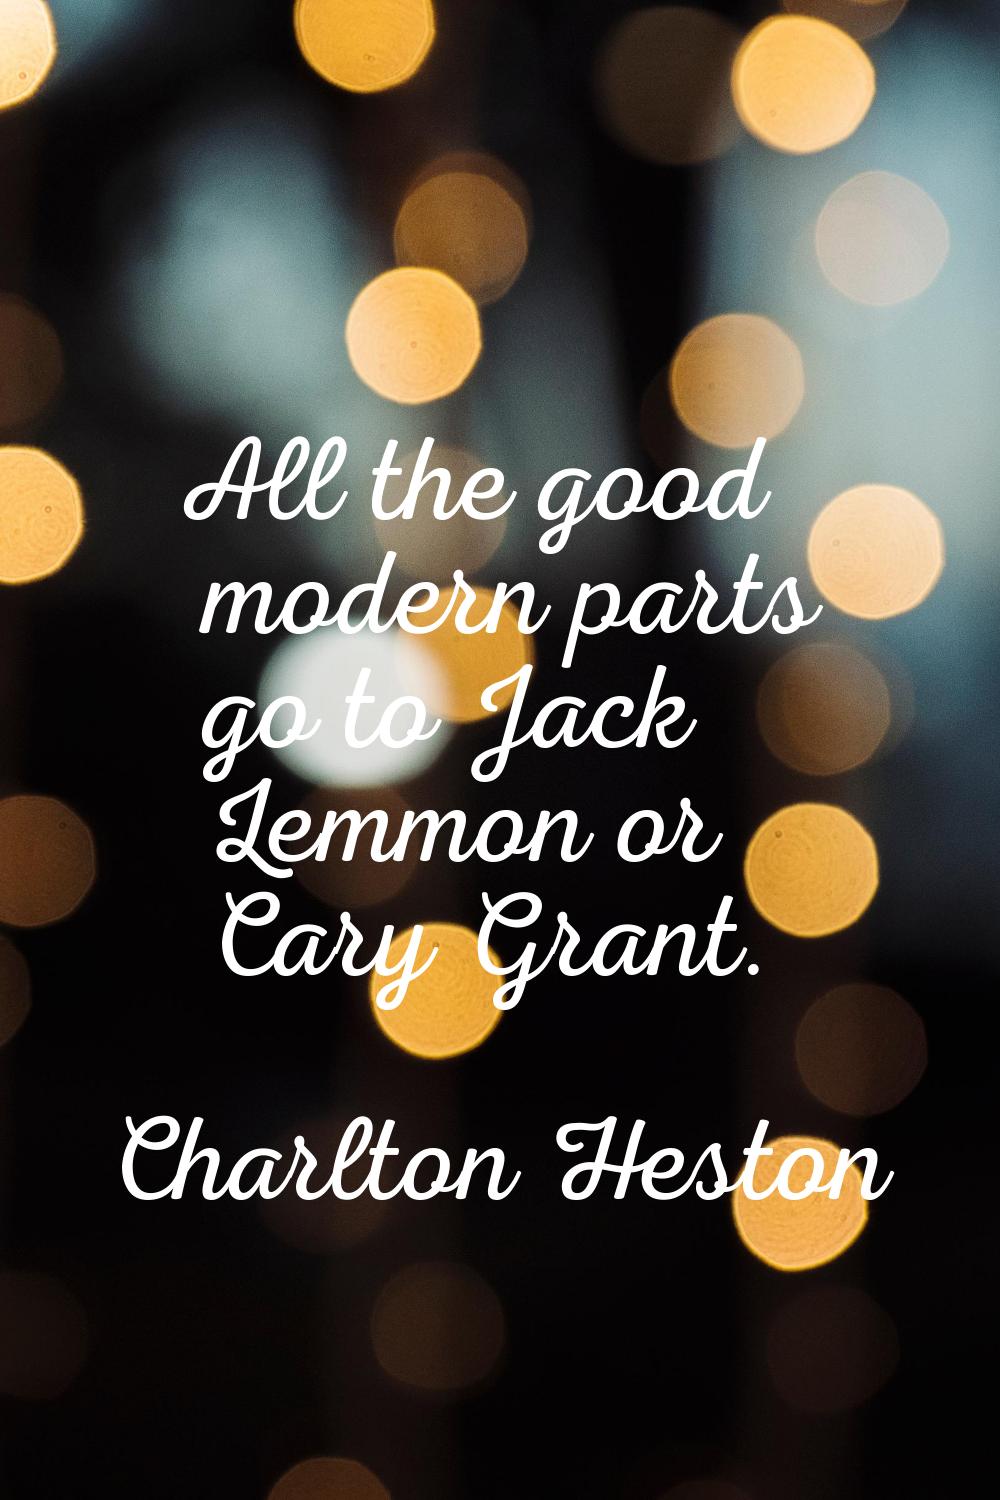 All the good modern parts go to Jack Lemmon or Cary Grant.